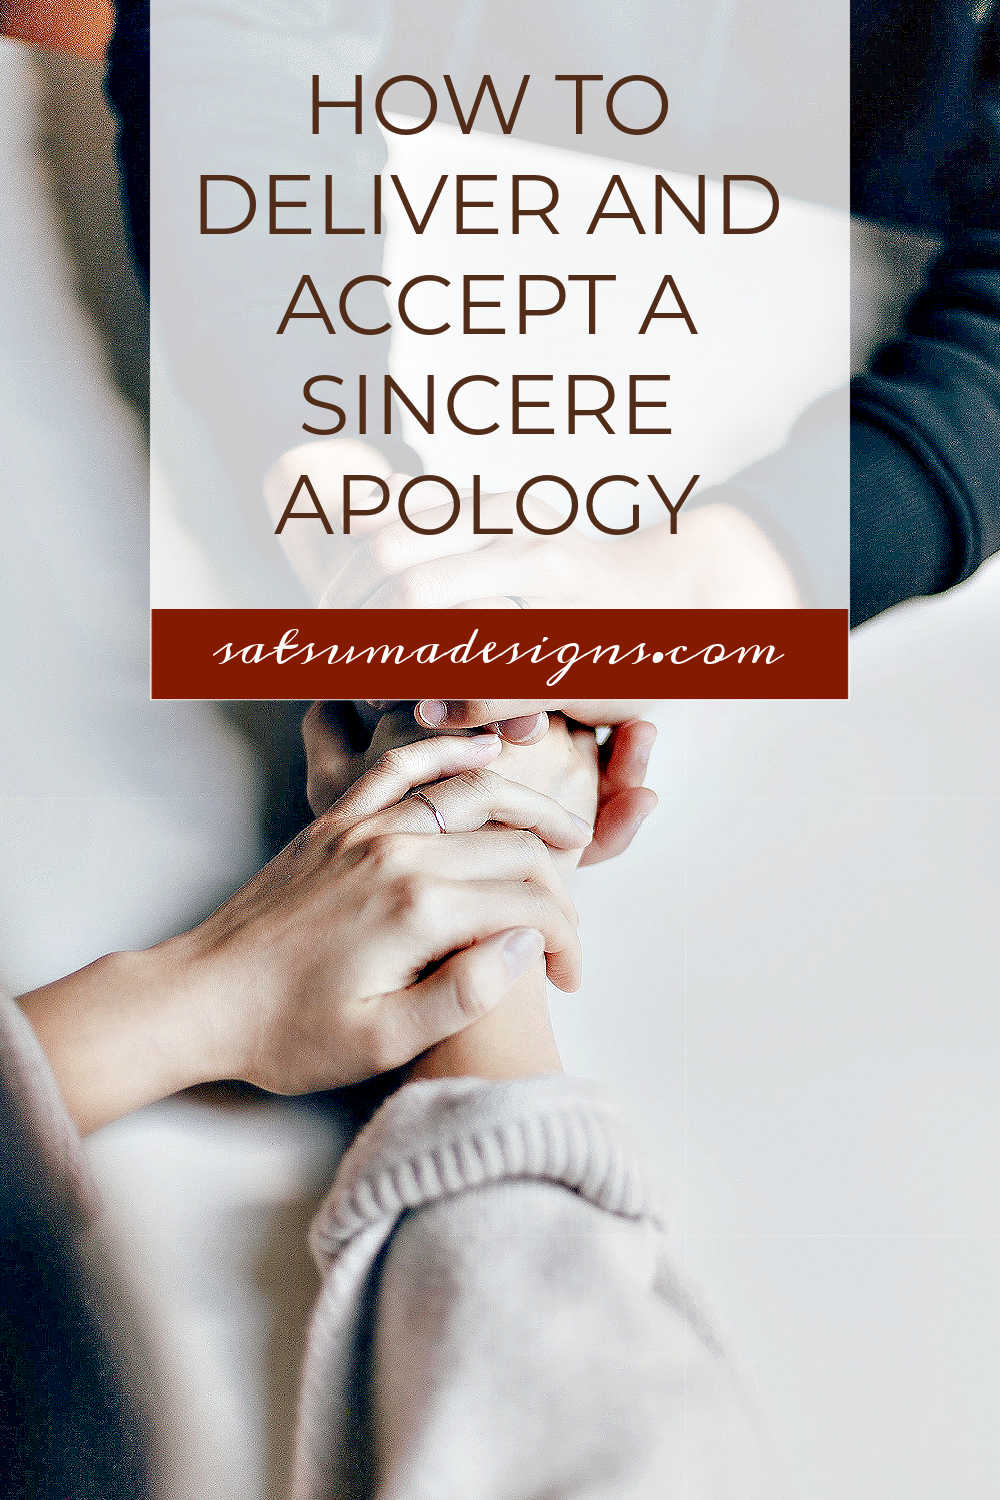 How to Deliver and Accept a Sincere Apology